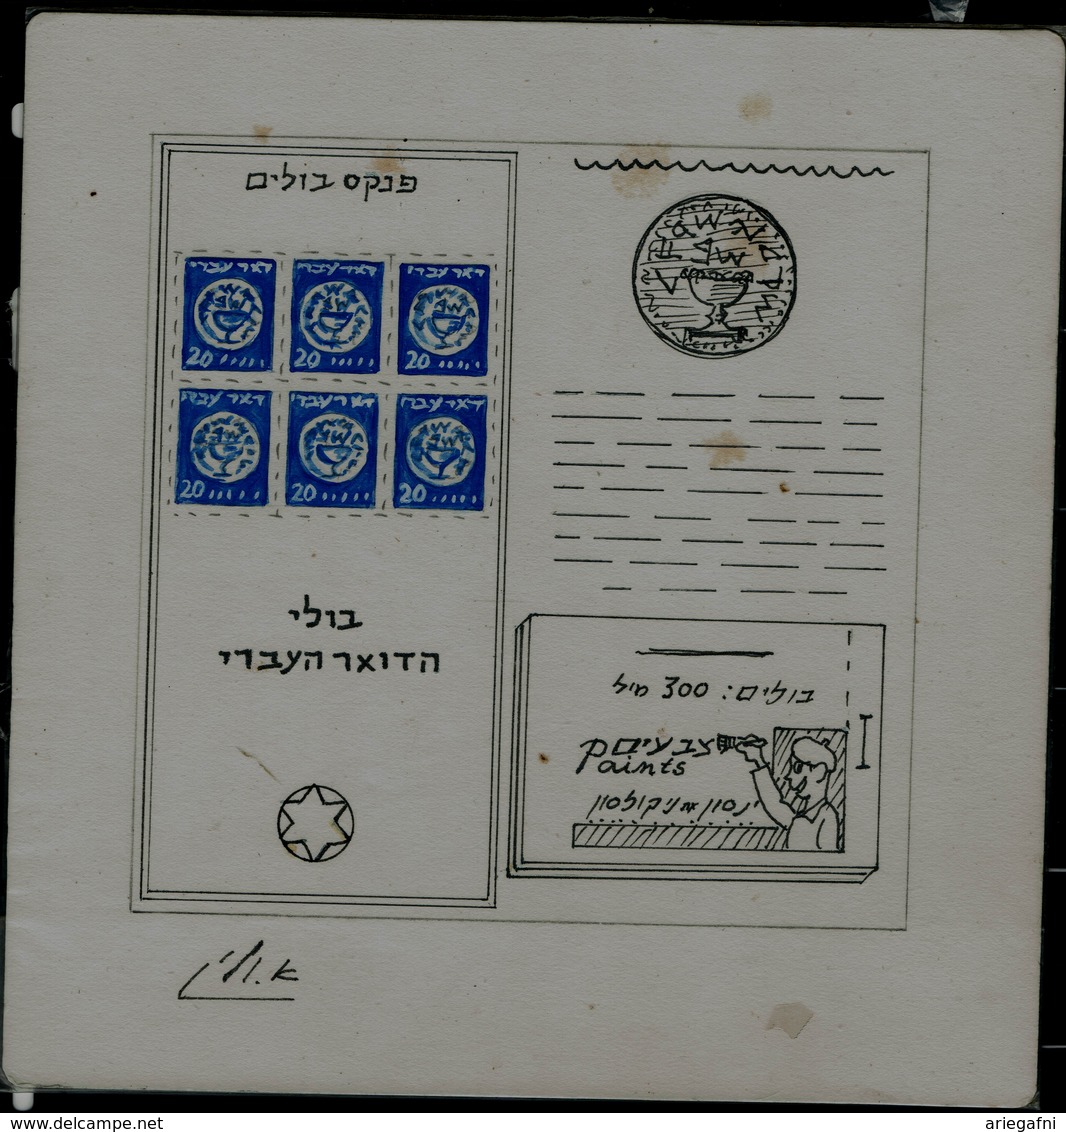 ISRAEL 1948 DOAR IVRI PRINTED OF DUKEET SIGNED BY ARTIST OTTO VALISH VERY RARE!! - Imperforates, Proofs & Errors